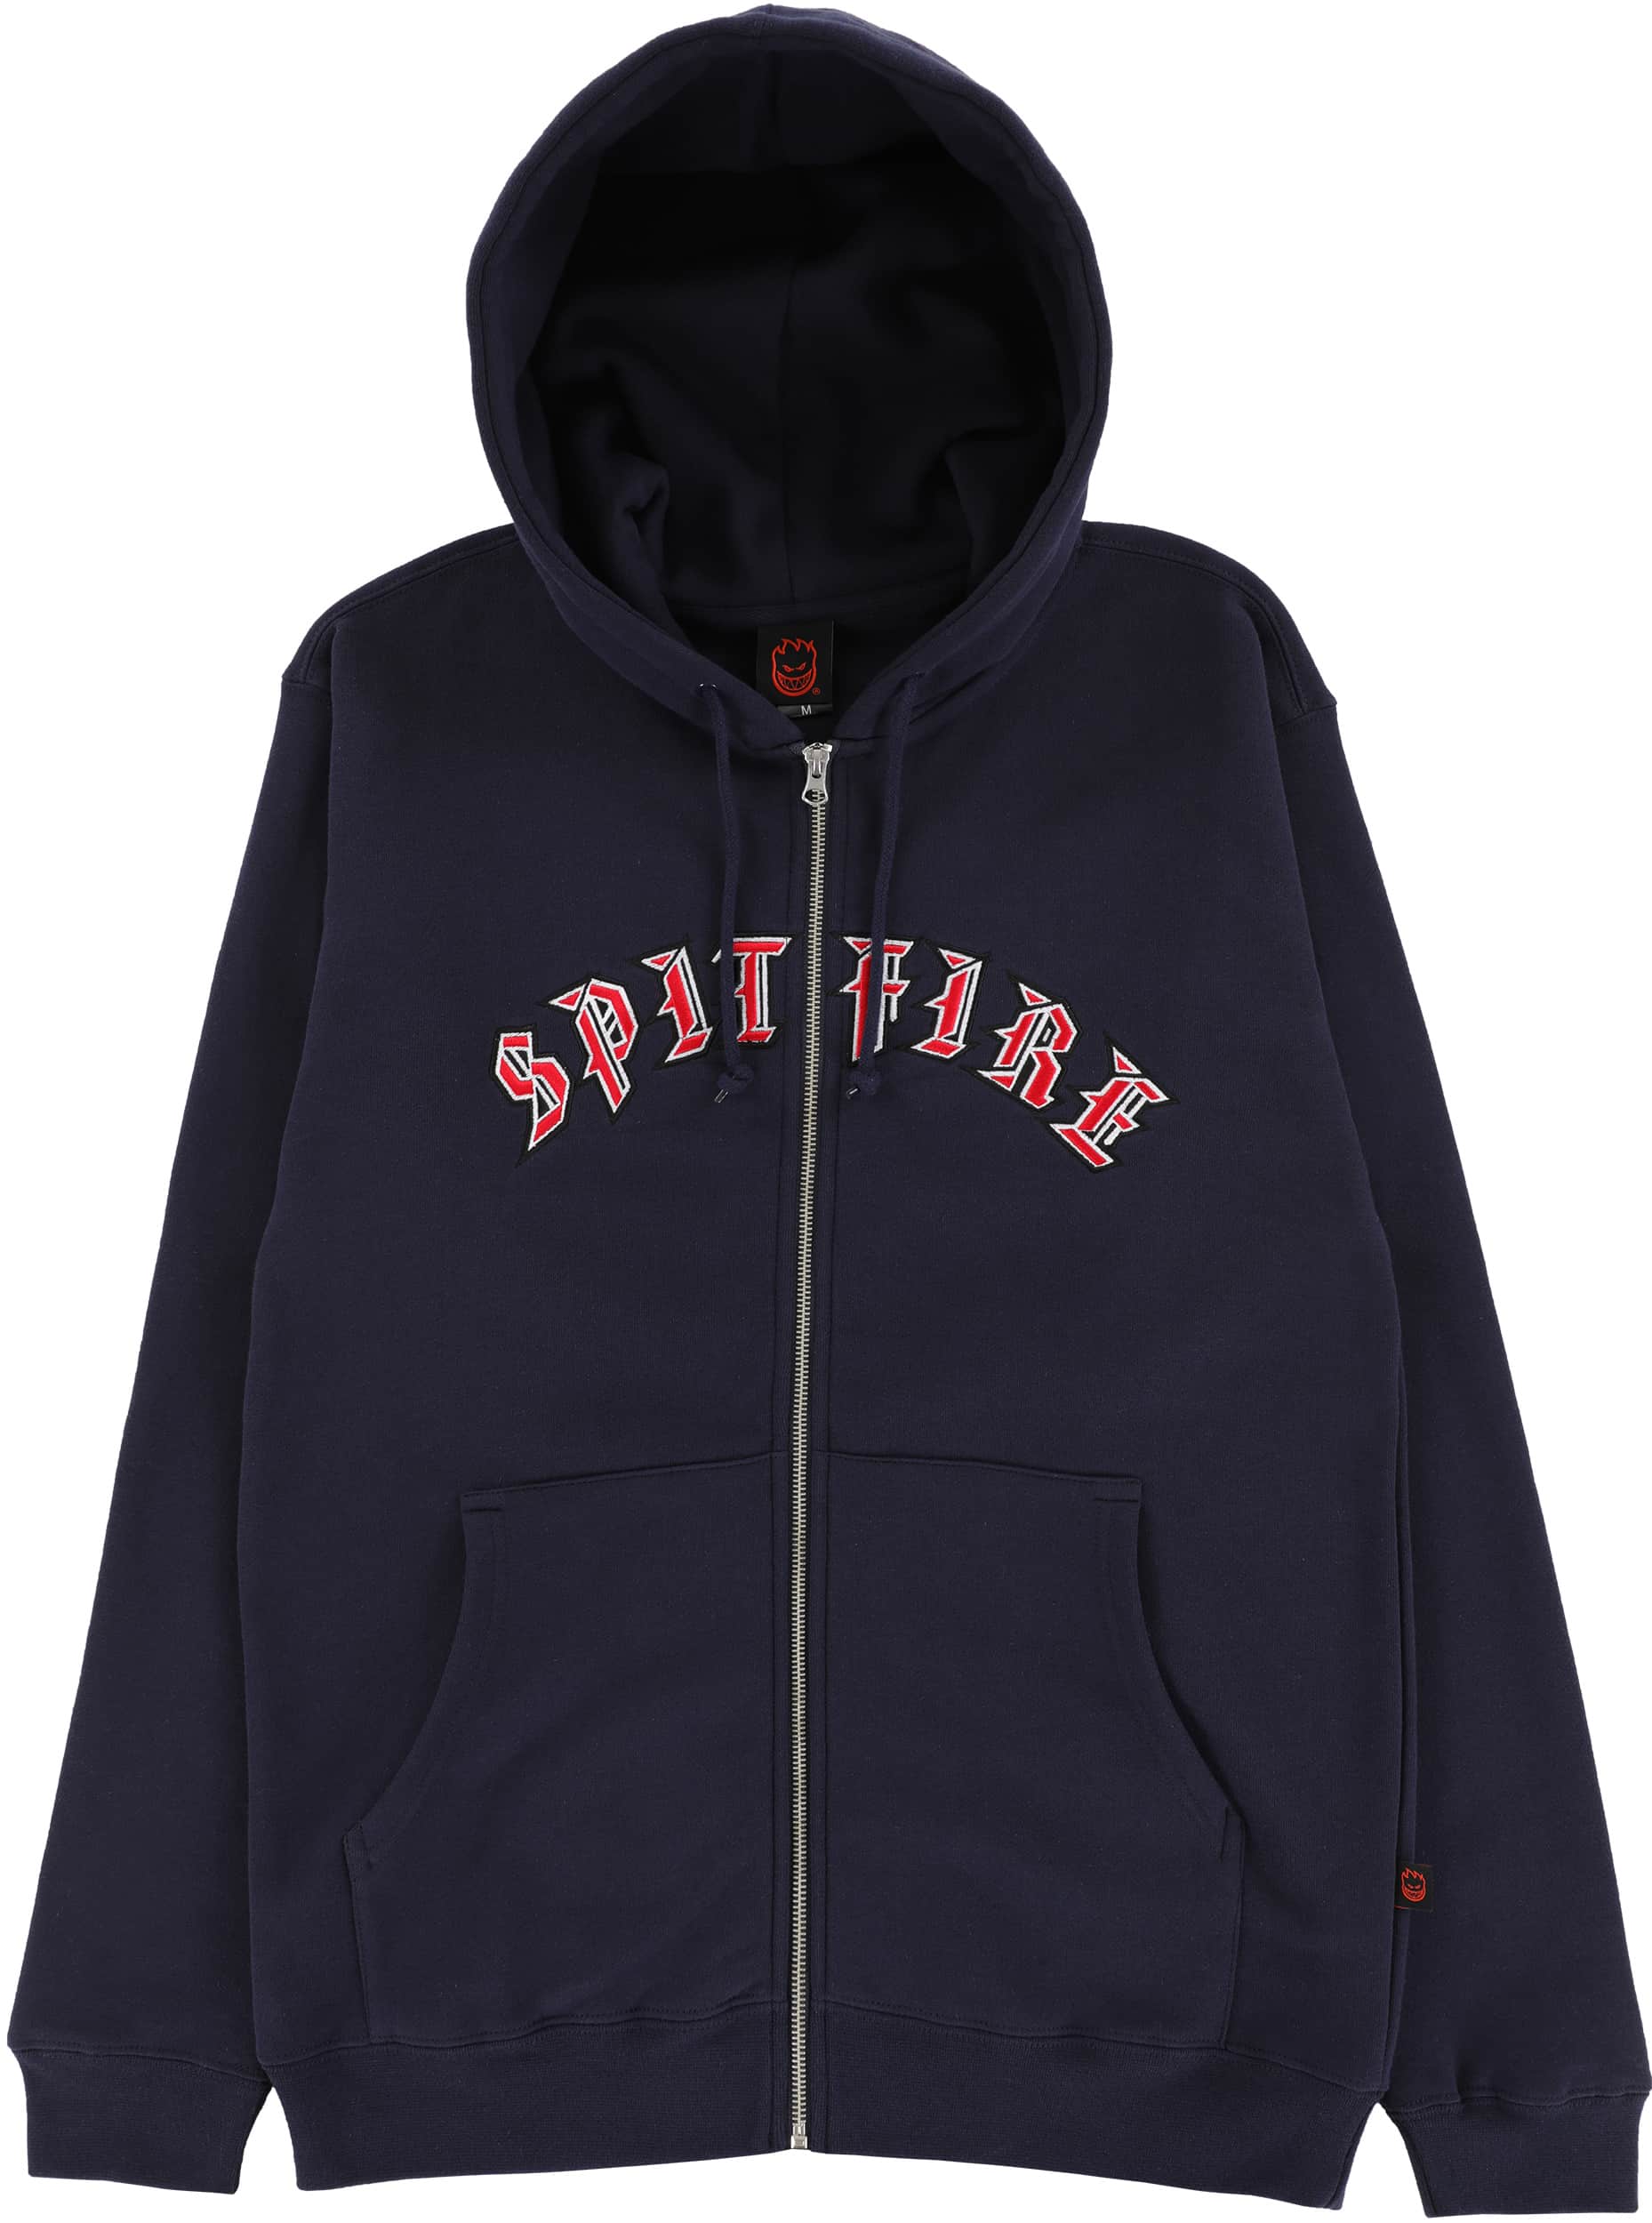 Spitfire Old E Embroidered Zip Hoodie - deep navy/red-white | Tactics